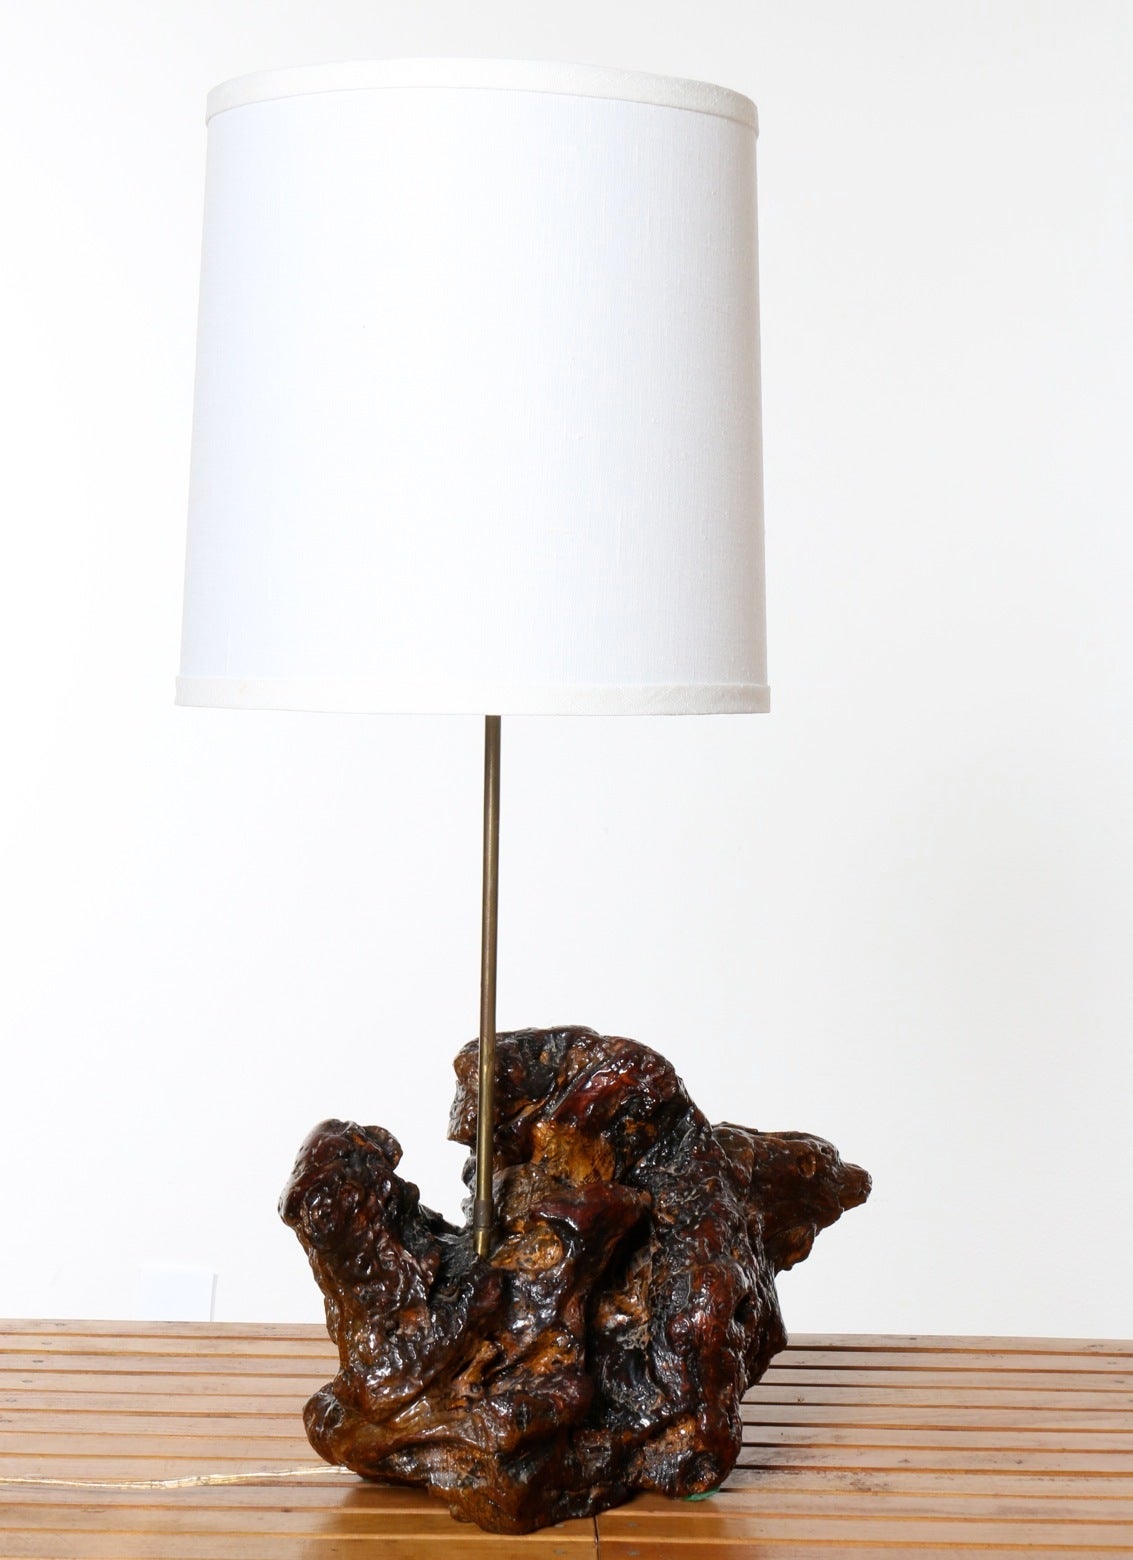 Burl Wood Table Lamp with Shade, California, 1960s For Sale 2